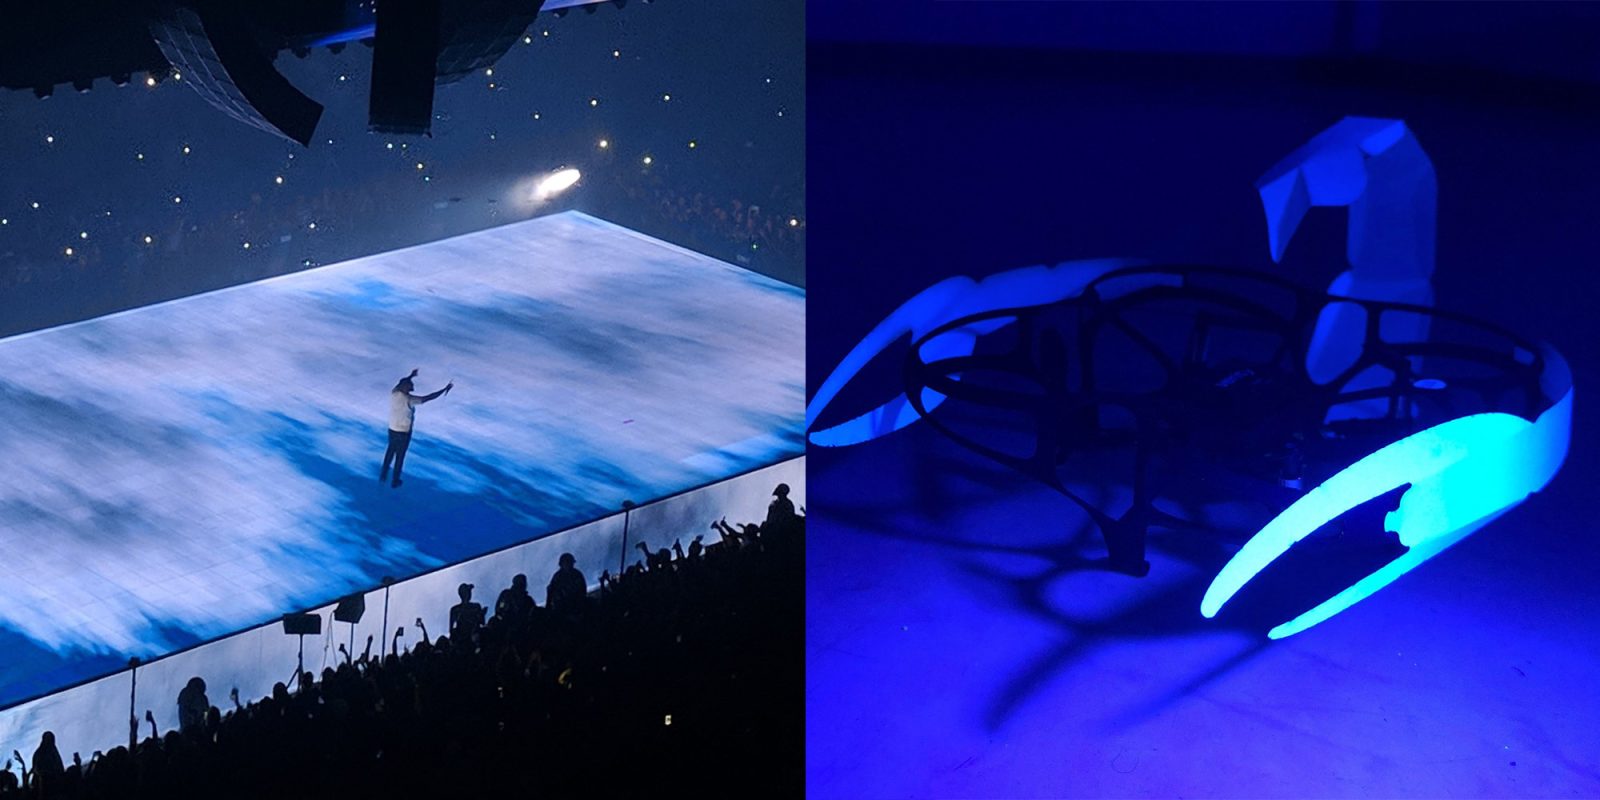 Lucie micro-drones dance with Drake in songs Elevate and Look Alive during show in Detroit